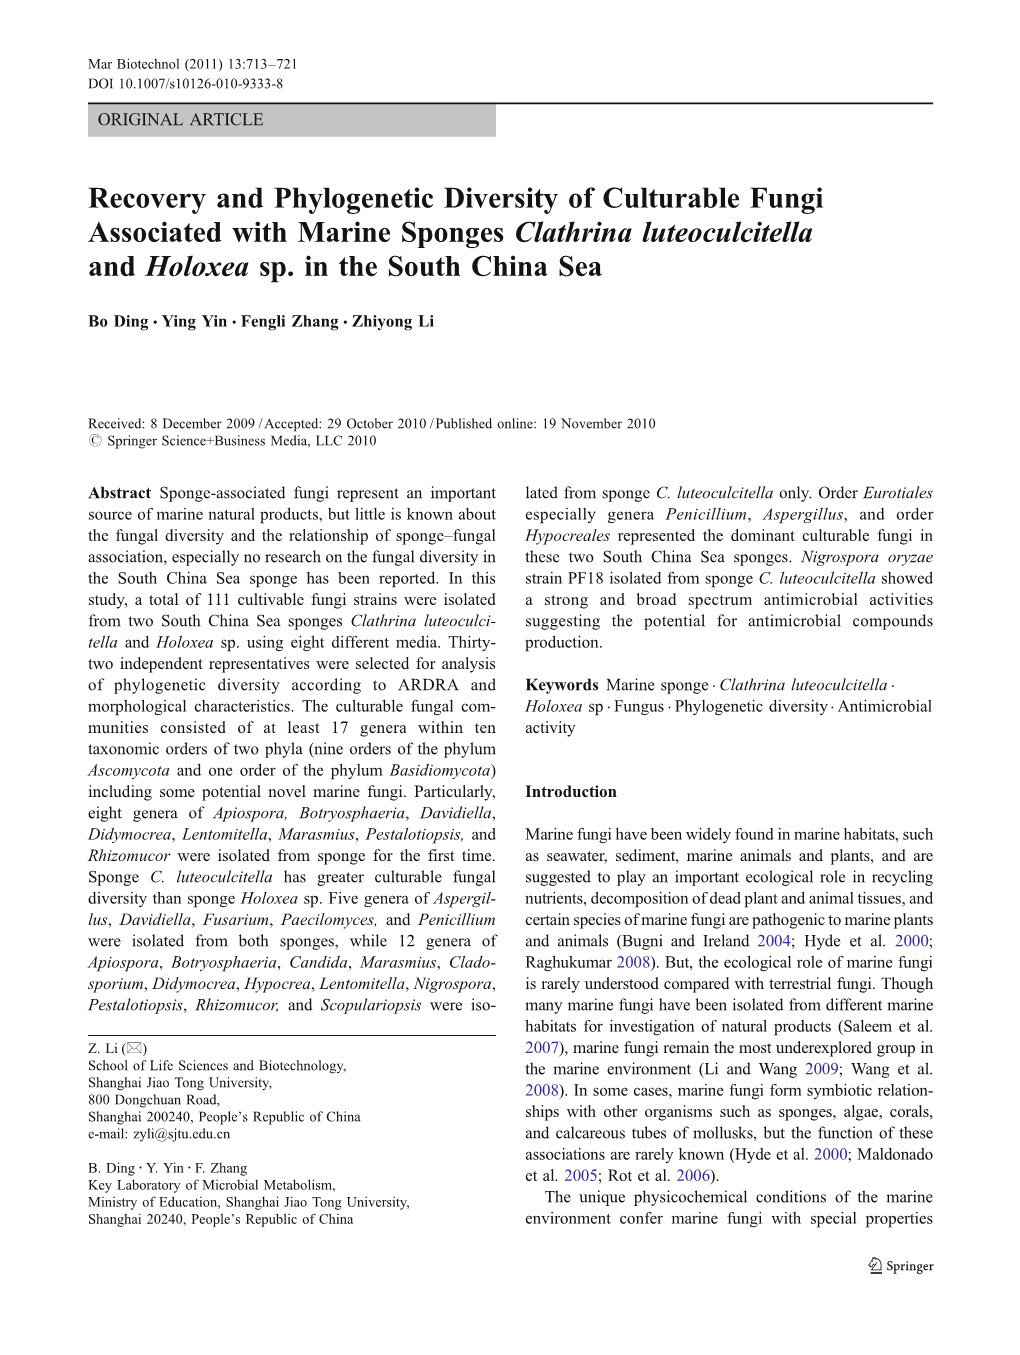 Recovery and Phylogenetic Diversity of Culturable Fungi Associated with Marine Sponges Clathrina Luteoculcitella and Holoxea Sp